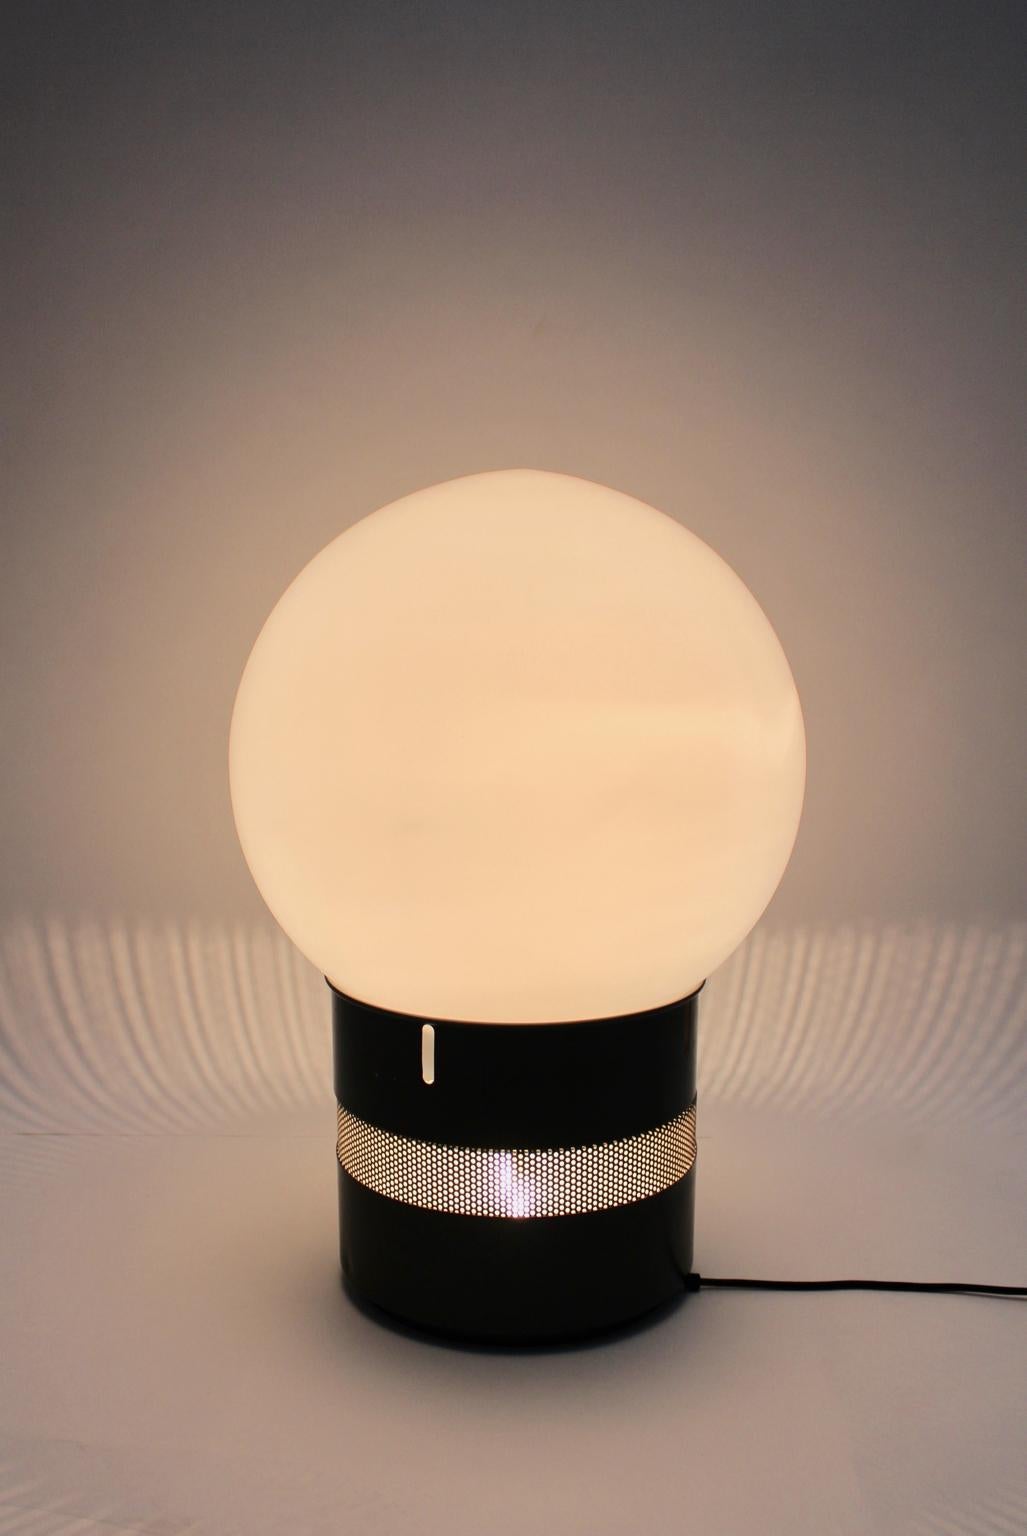 Gae Aulenti Mid-Century Modern vintage table lamp from glass and metal model Oracolo designed 1968 Italy and executed by Artemide, Pregnana Milanese Italy.
A white glass sphere sits atop a cylindrical column of brown enameled metal. This table lamp